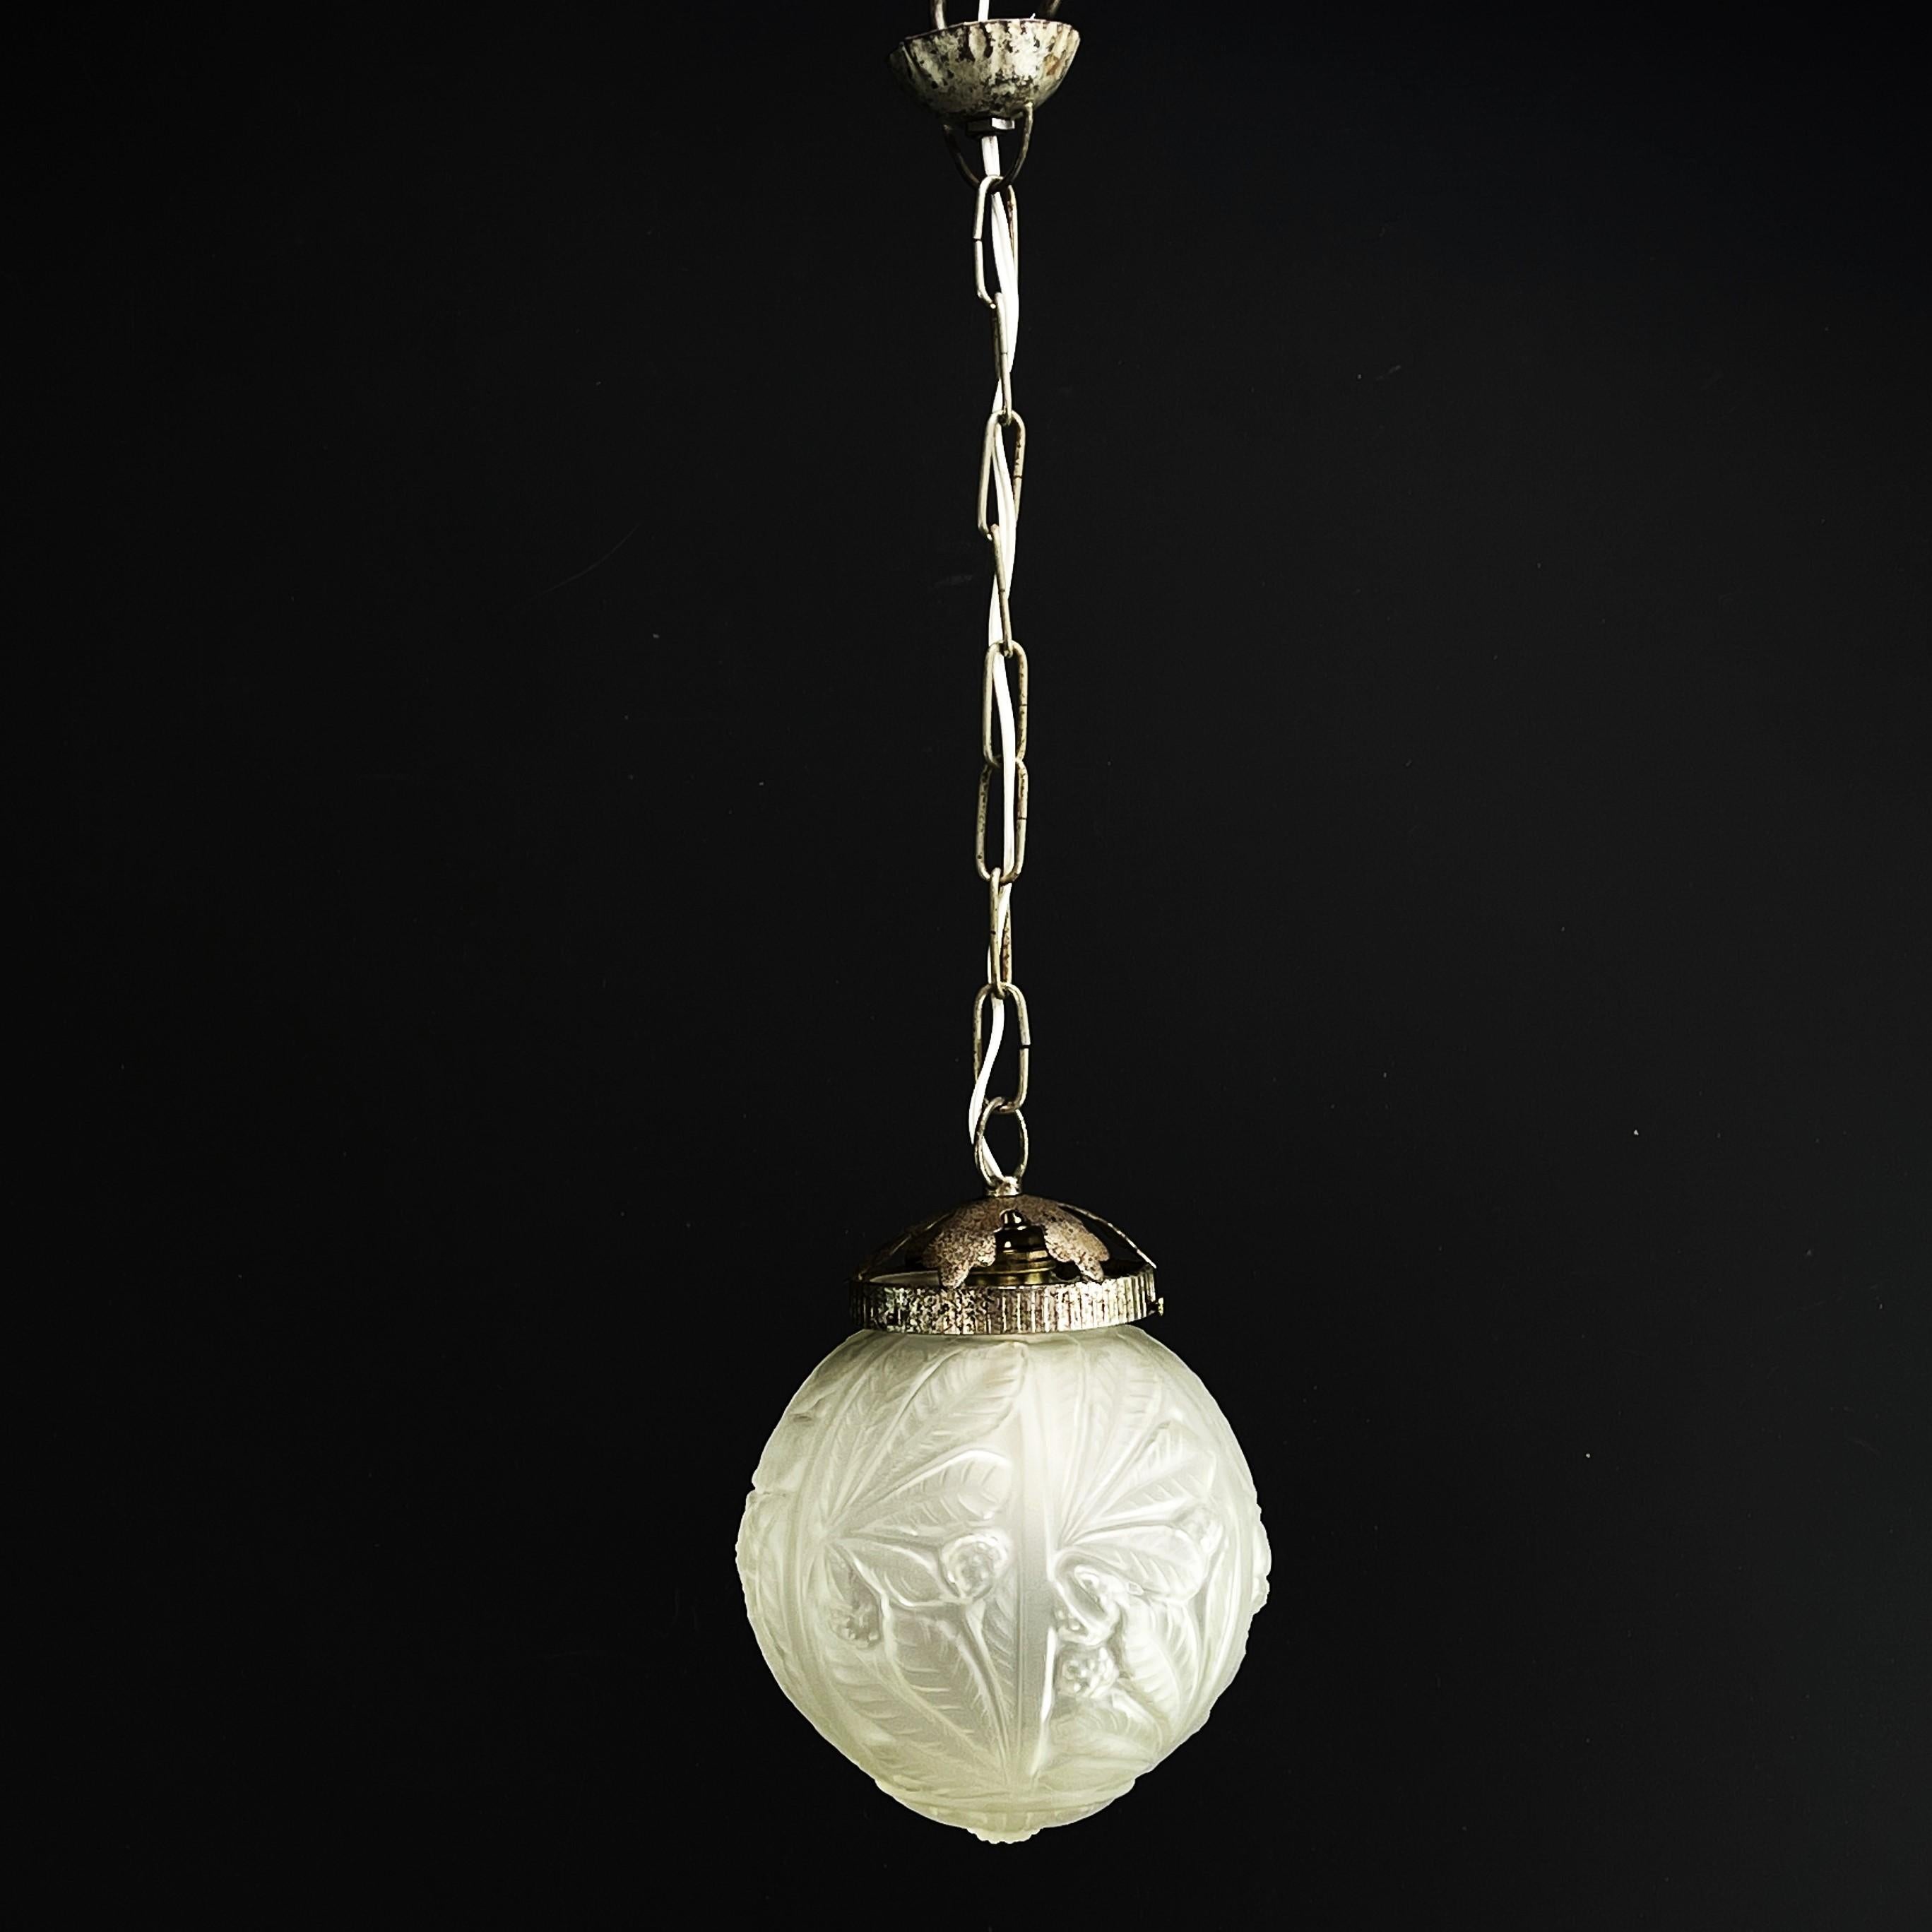 Art-Deco-Lüstre Ball lamp luminaire - 1930er Jahre

This Art Deco globe lamp from the 1930s is an outstanding example of the elegance and sophistication of the Art Deco style. With its combination of metal and glass, this chandelier embodies the